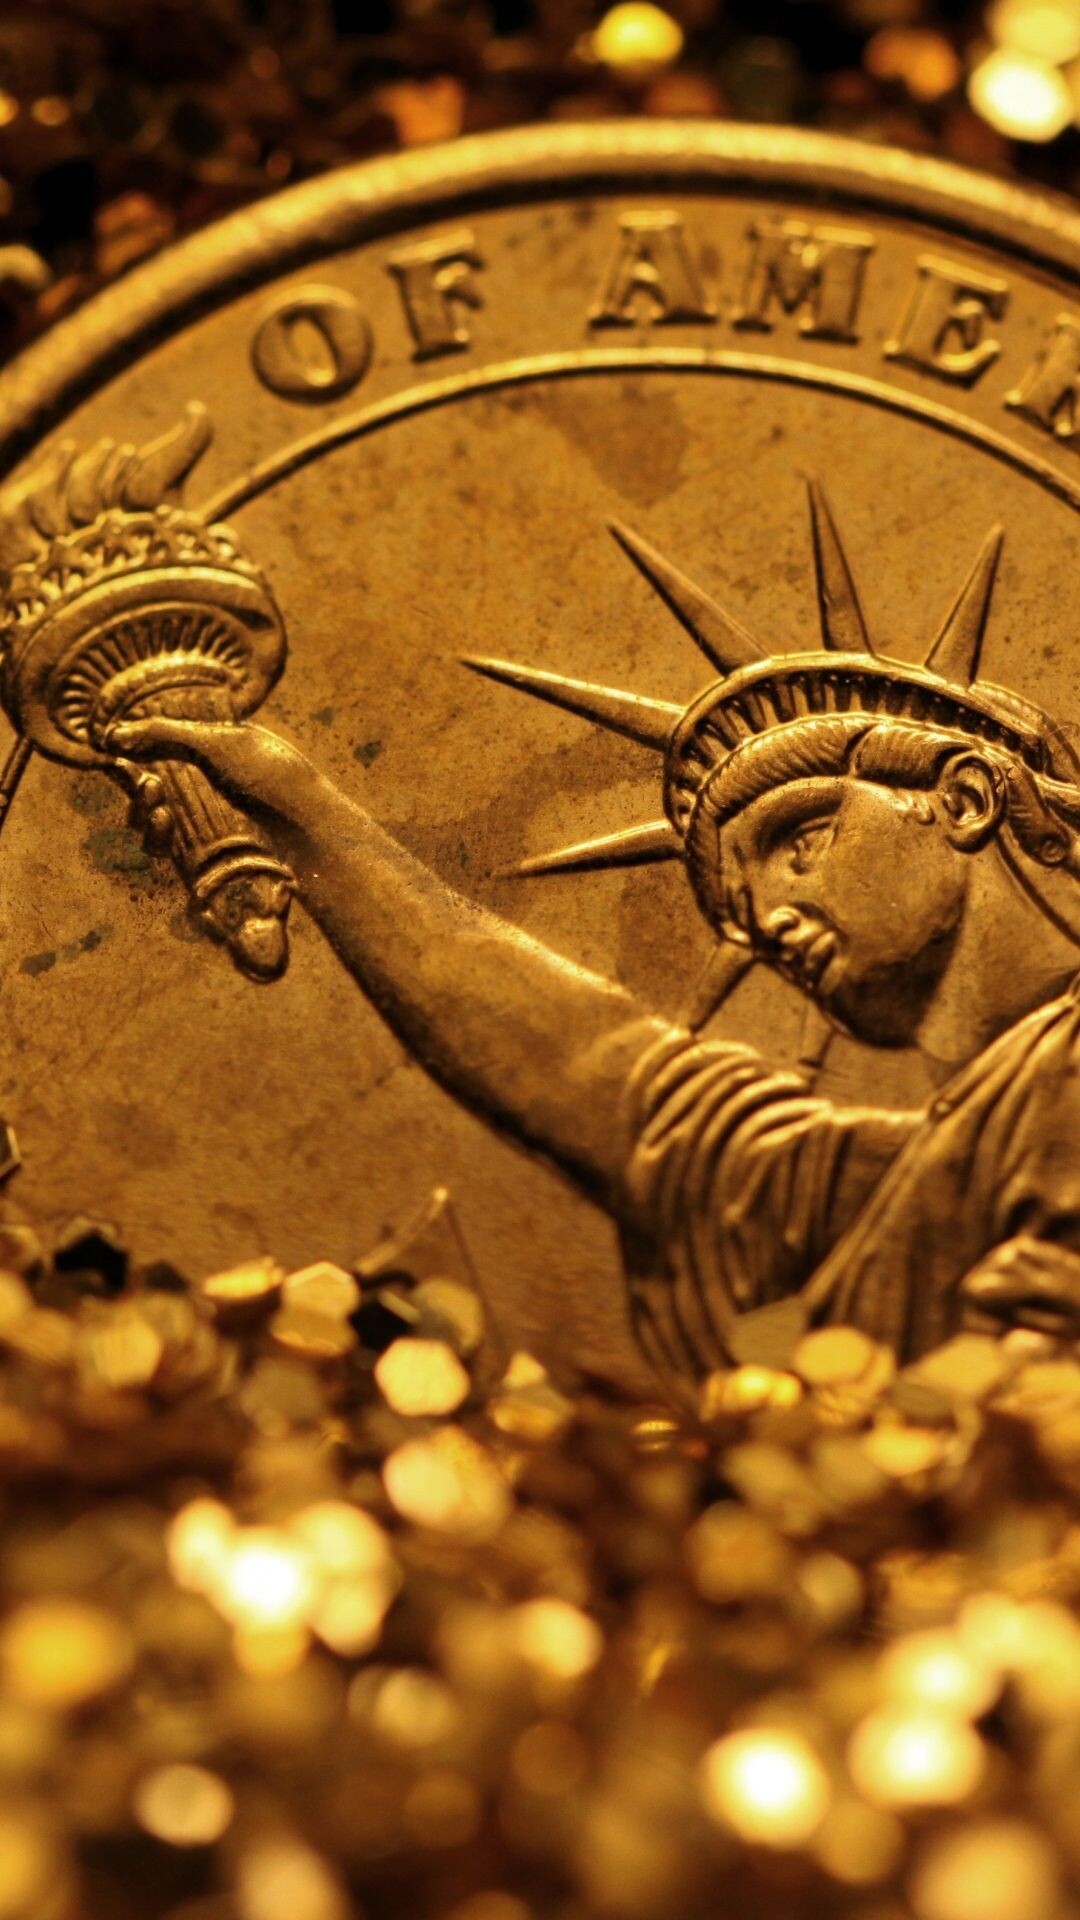 Gold Coins: The obverse design, Statue of Liberty commemorative coin issued by American Mint. 1080x1920 Full HD Background.